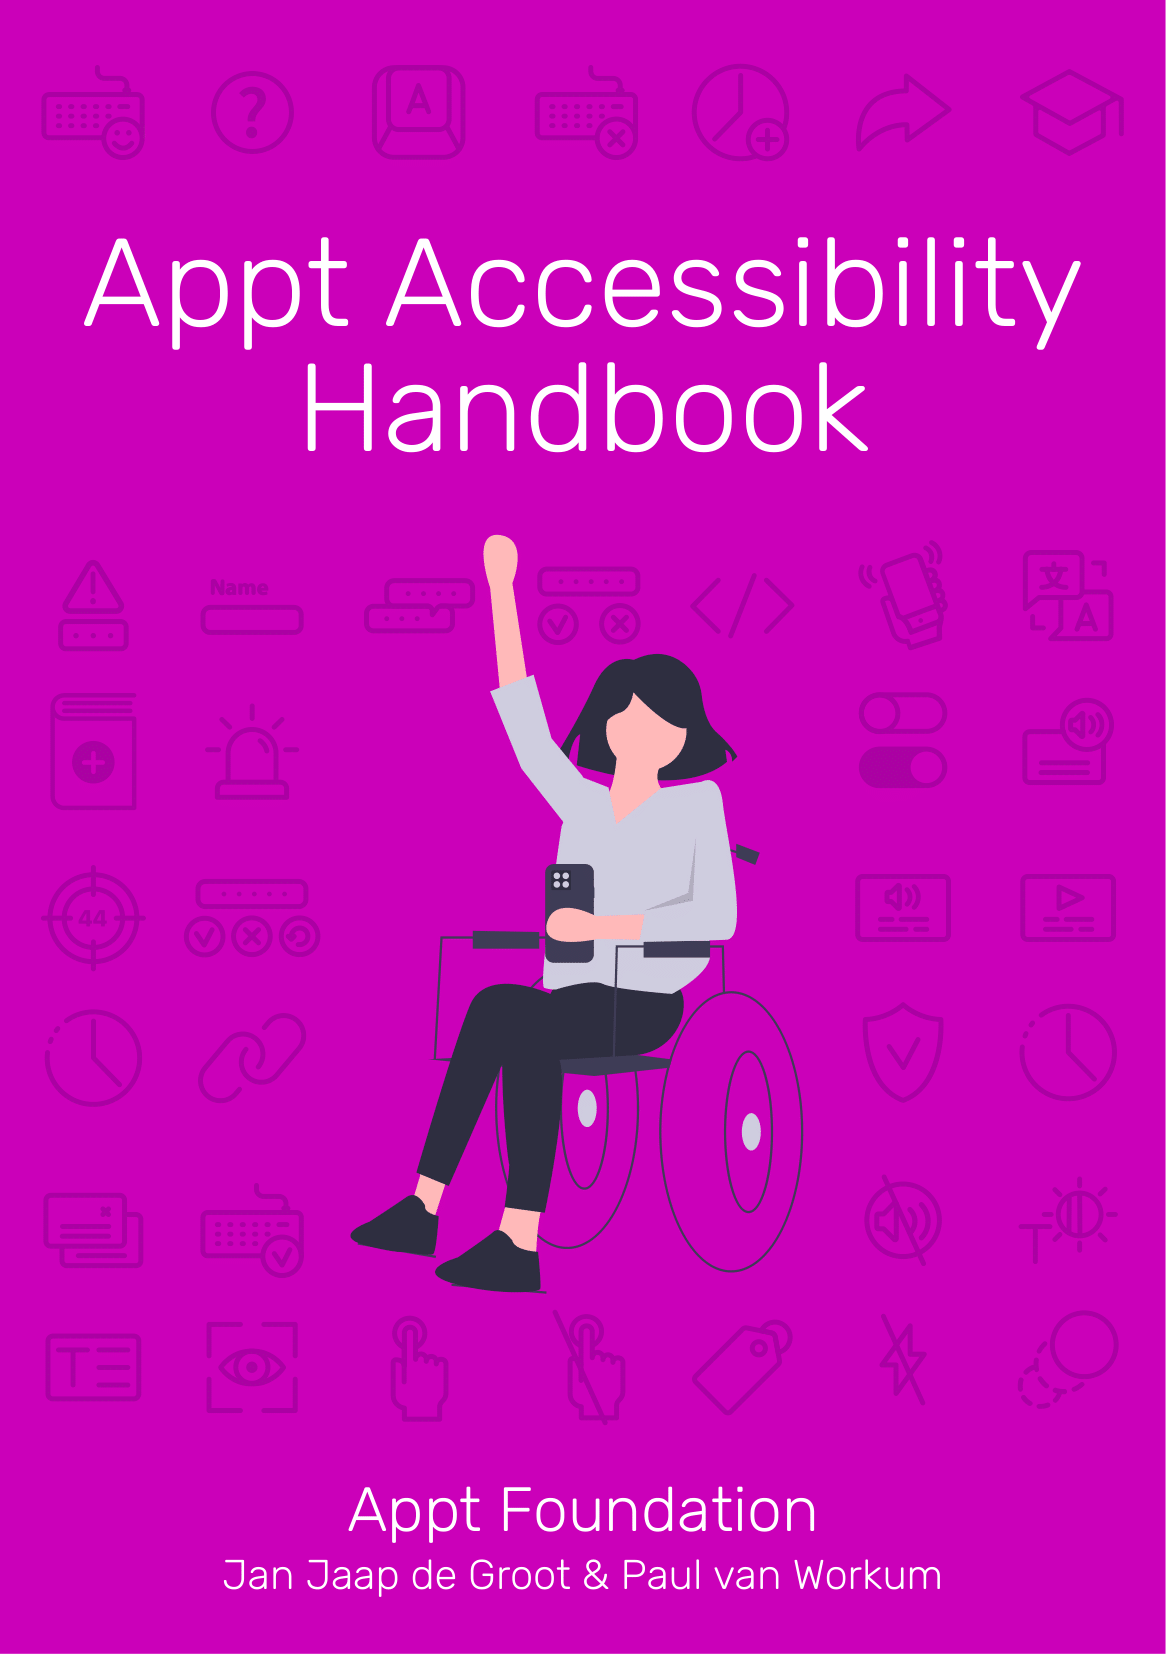 The cover of the handbook displays the title Appt accessibility handbook, the publisher Appt Foundation, the authors Jan Jaap de Groot and Paul van Workum and an illustration of a person in a wheelchair surrounded by icons related to accessibility